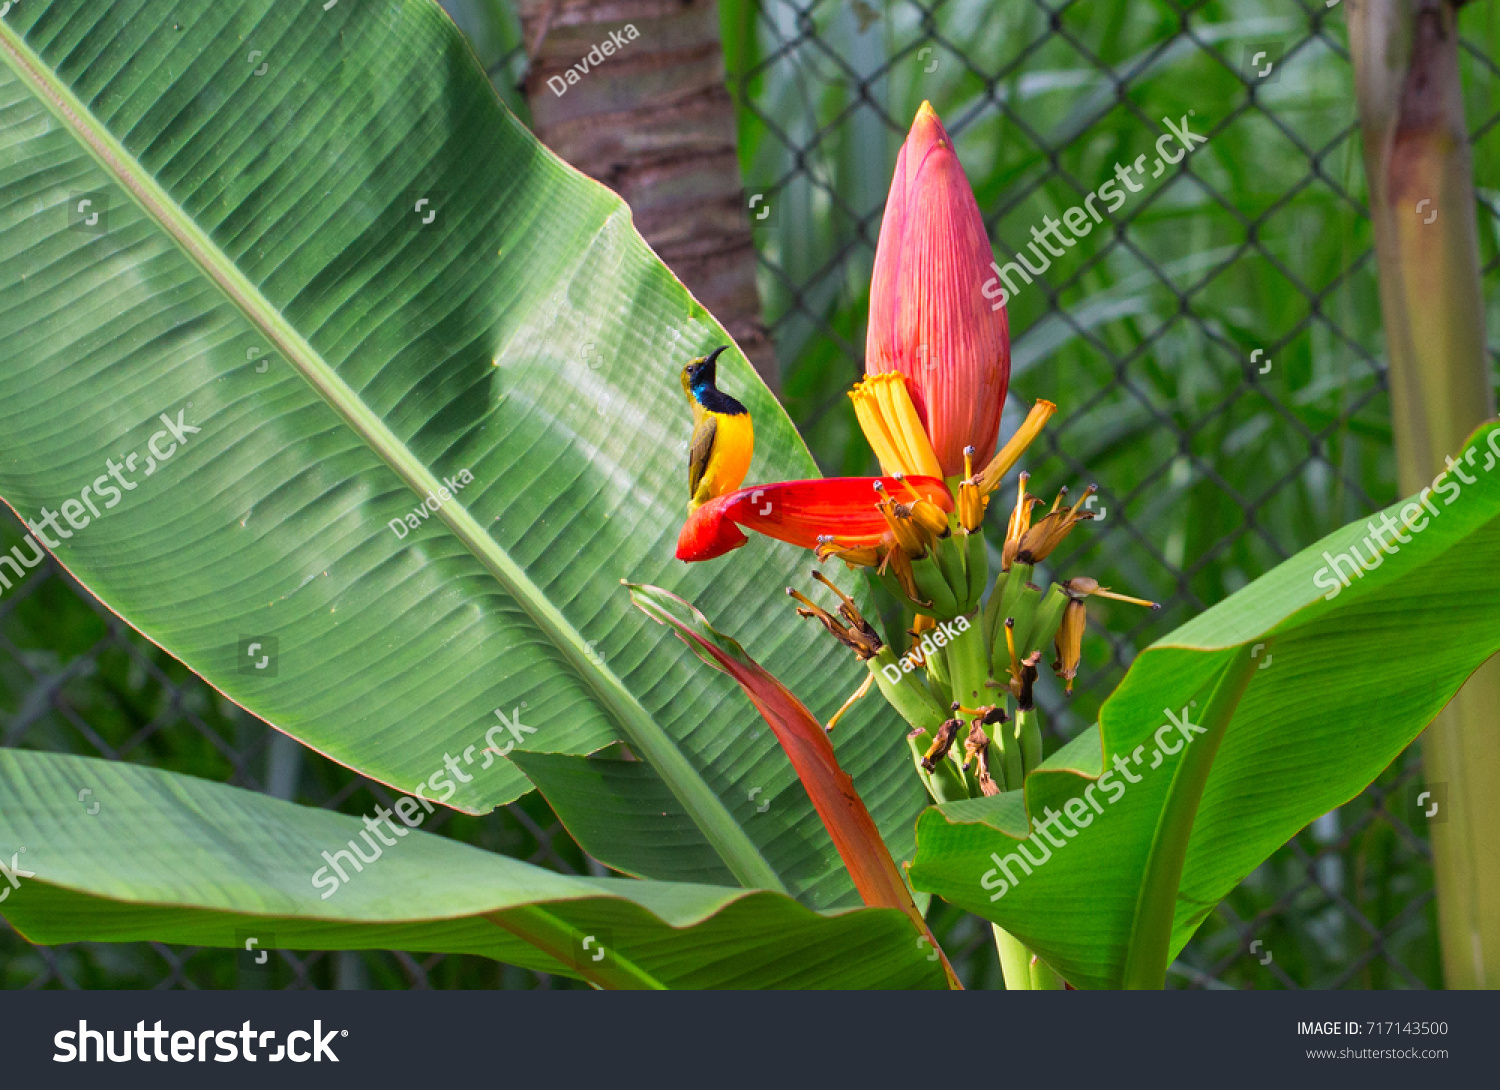 Tropical bird sings on banana flower. Olive-back sunbird male on exotic plant. Exotic nature photo for wallpaper or background. Small yellow bird with blue chest. Nectar drinking bird. Tropical fauna #717143500